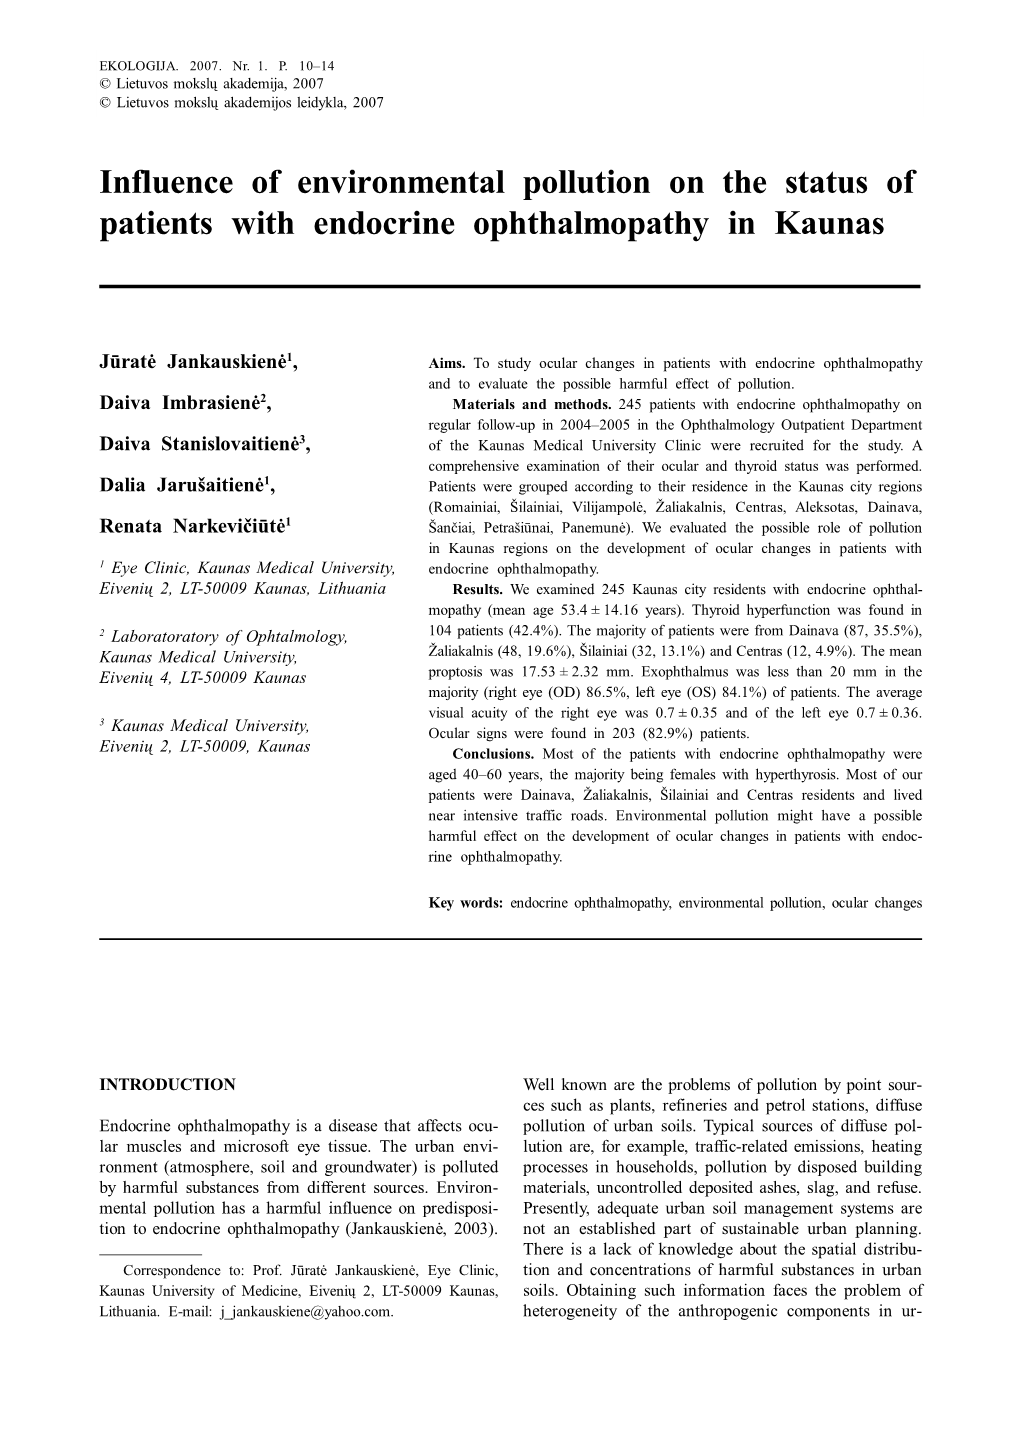 Influence of Environmental Pollution on the Status of Patients with Endocrine Ophthalmopathy in Kaunas